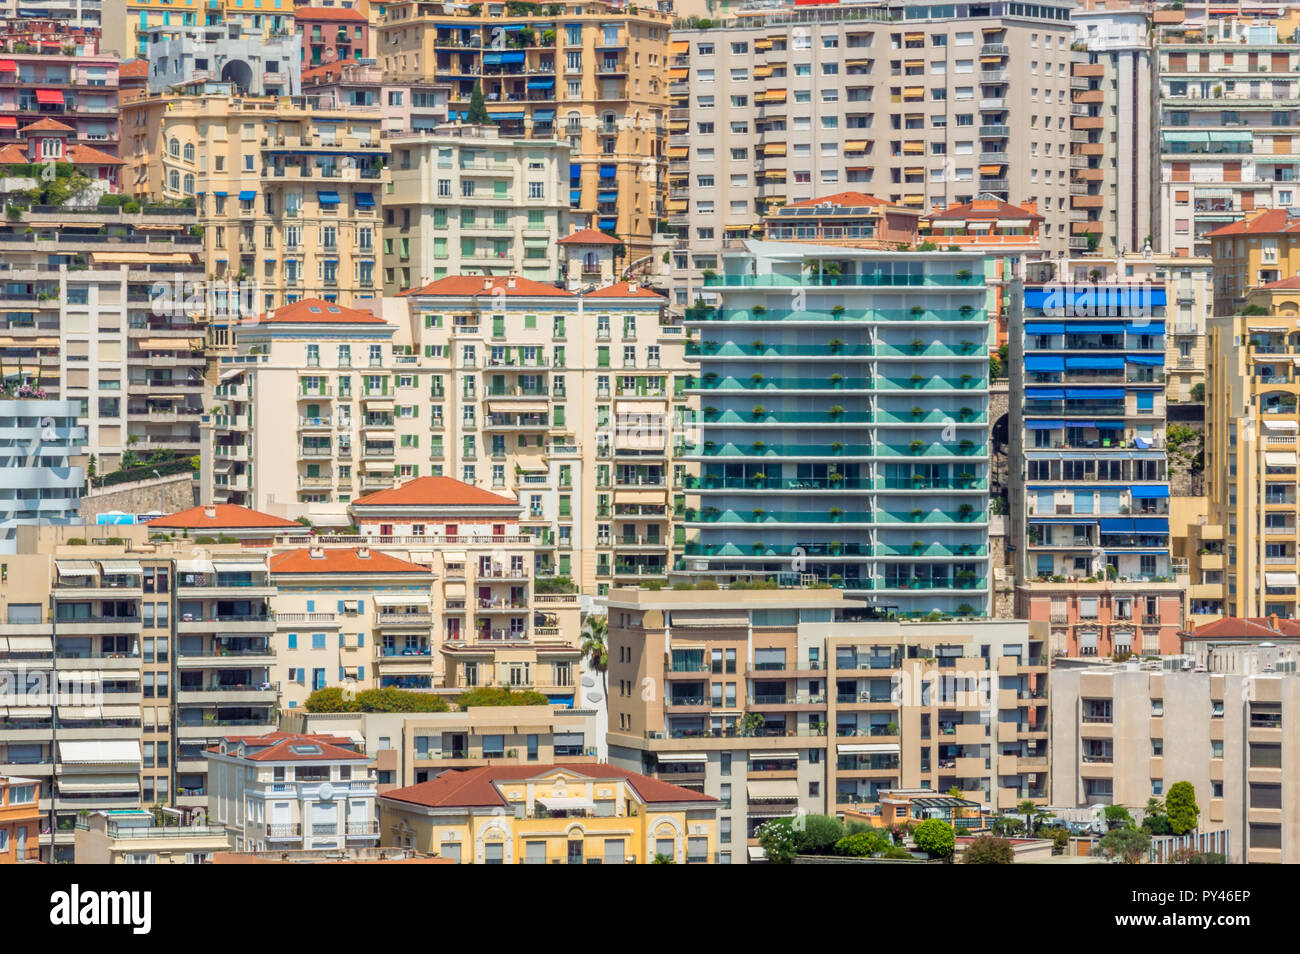 Buildings piled on top of each other in the Principality of Monaco during a summer day Stock Photo